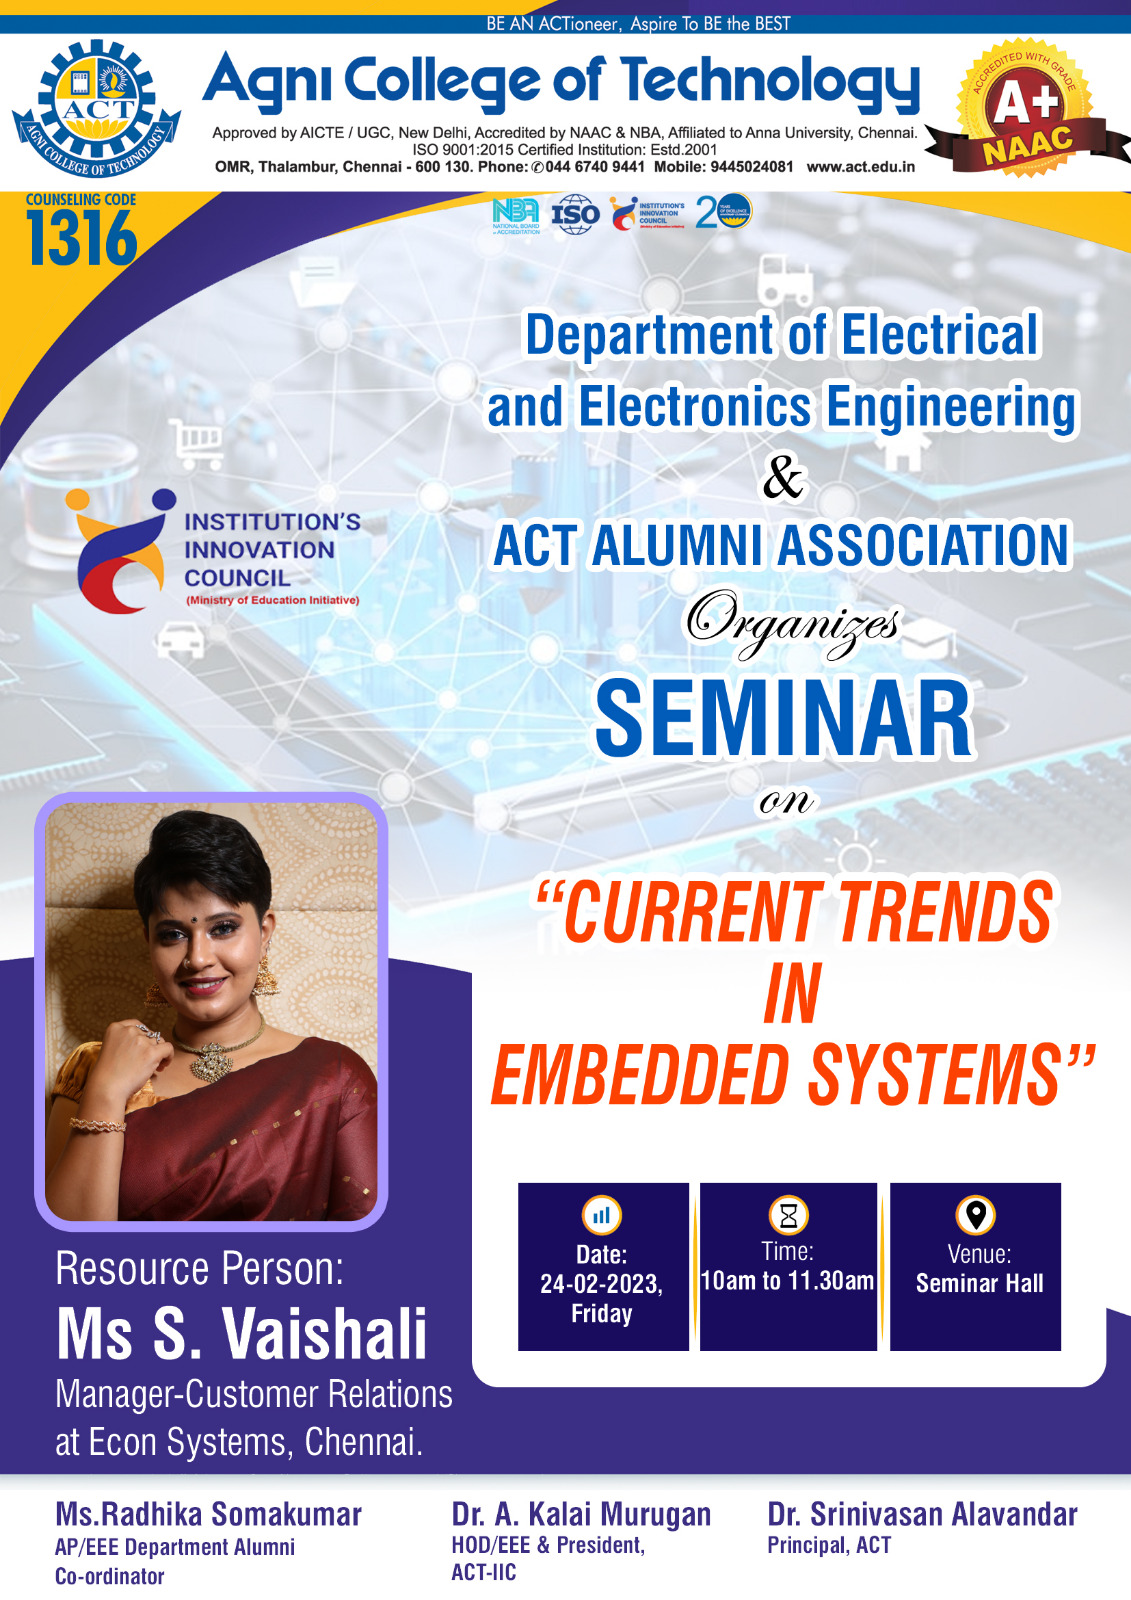 Seminar on “Current Trends in Embedded Systems”